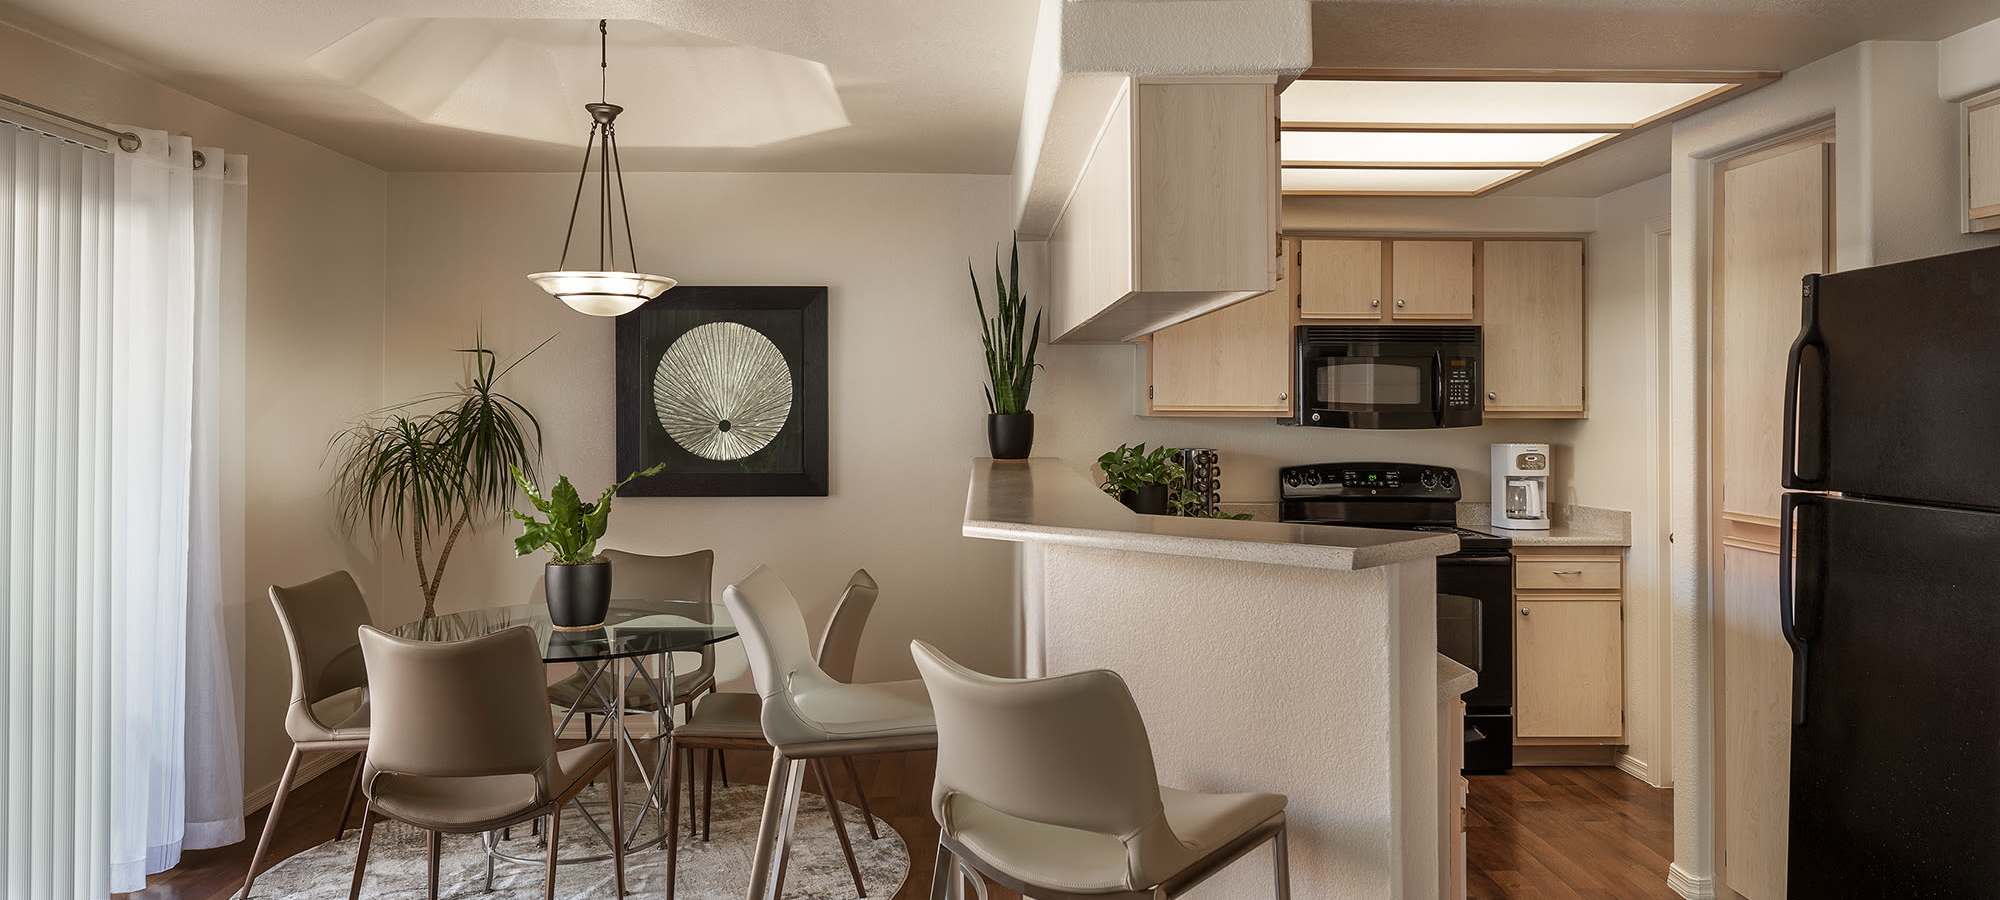 Partial view of a model home's kitchen from the dining area at San Palmilla in Tempe, Arizona